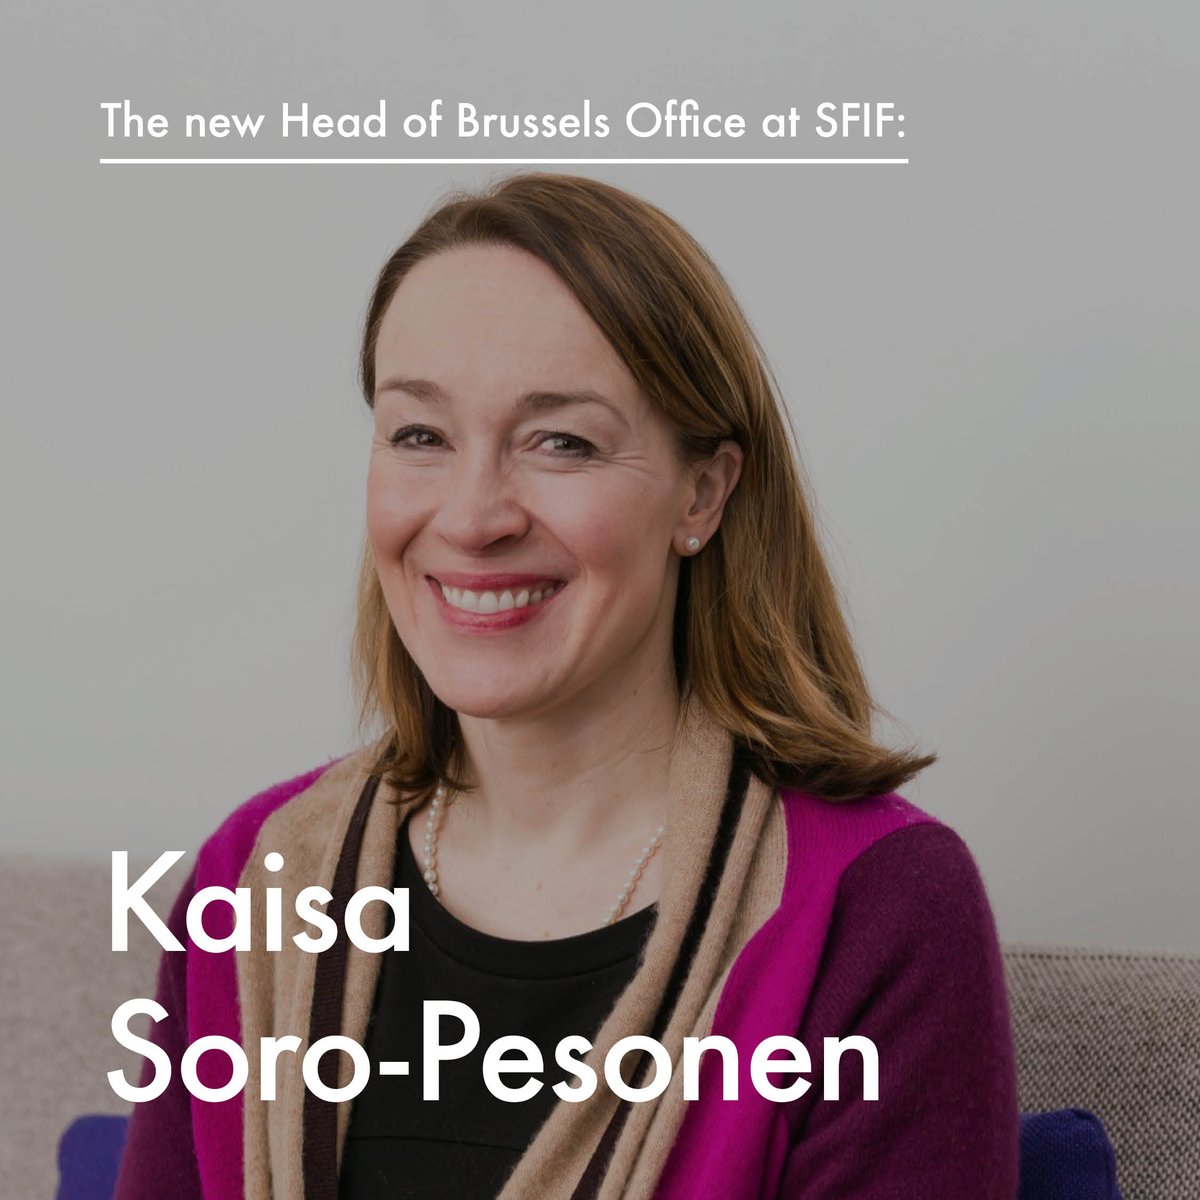 We are thrilled to welcome @kaisamaria as new Head of our Brussels office #newjob #EUjob #EUjobs Read more ➡️forestindustries.se/news/latest-ne…